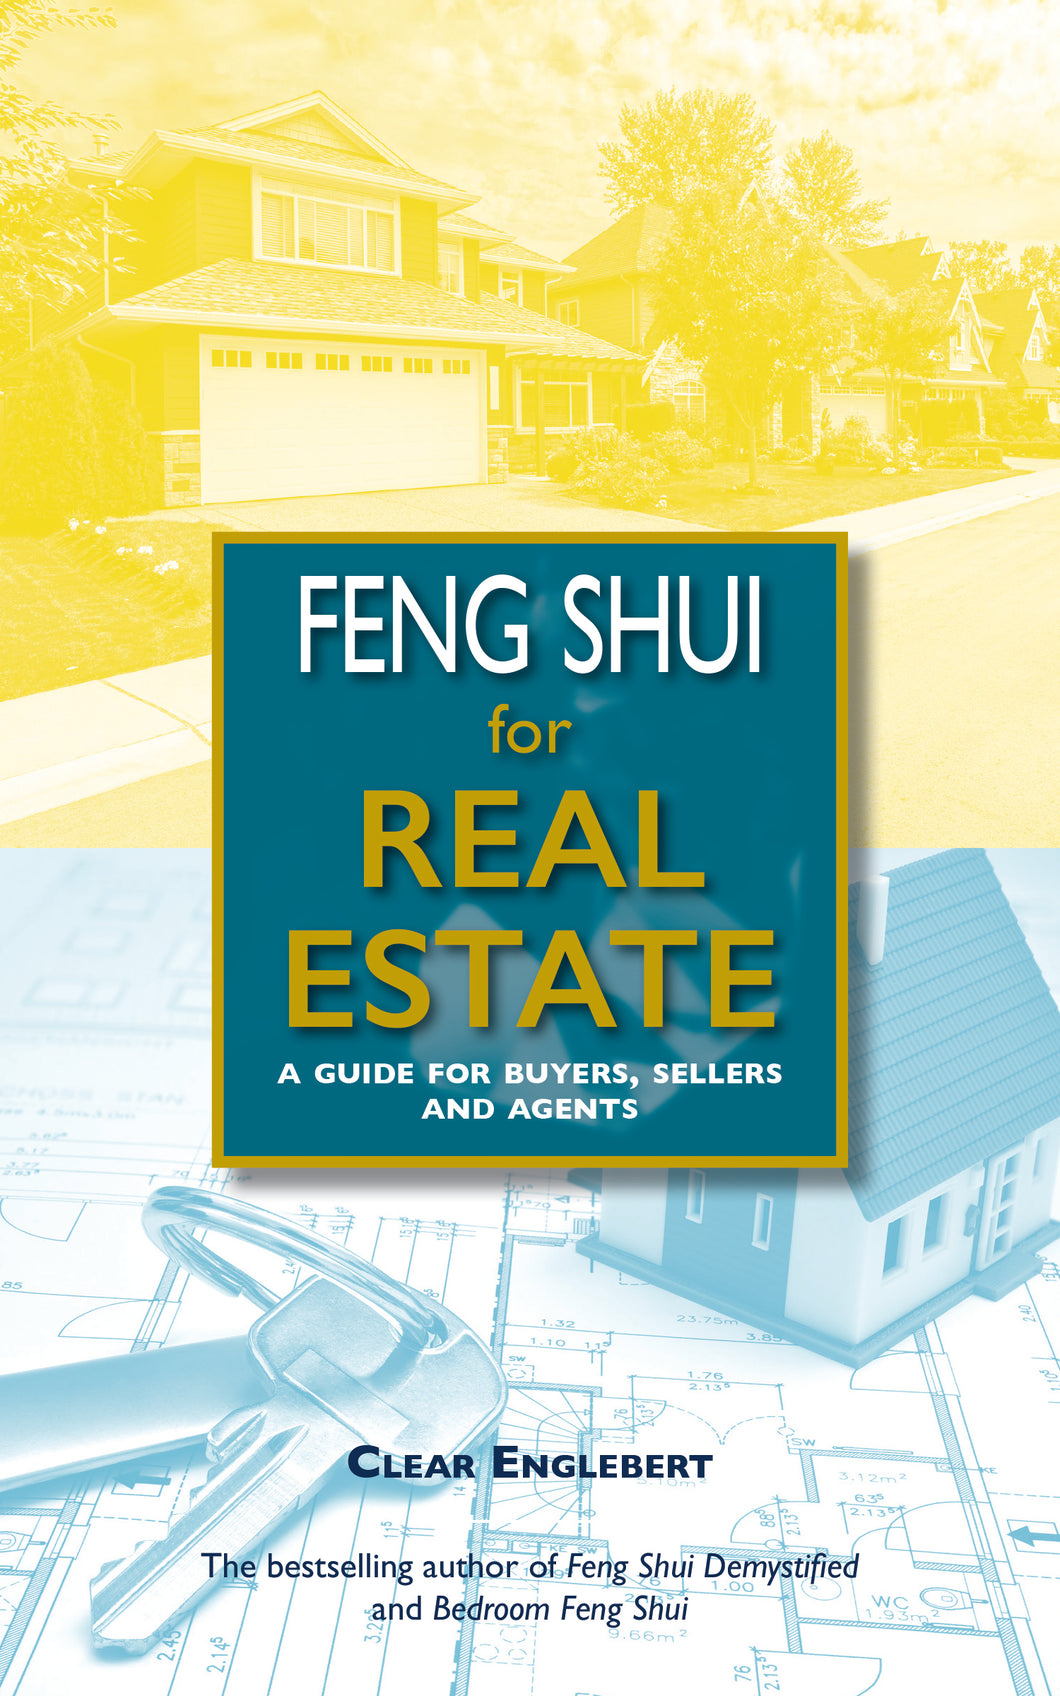 Feng Shui for Real Estate by Clear Englebert